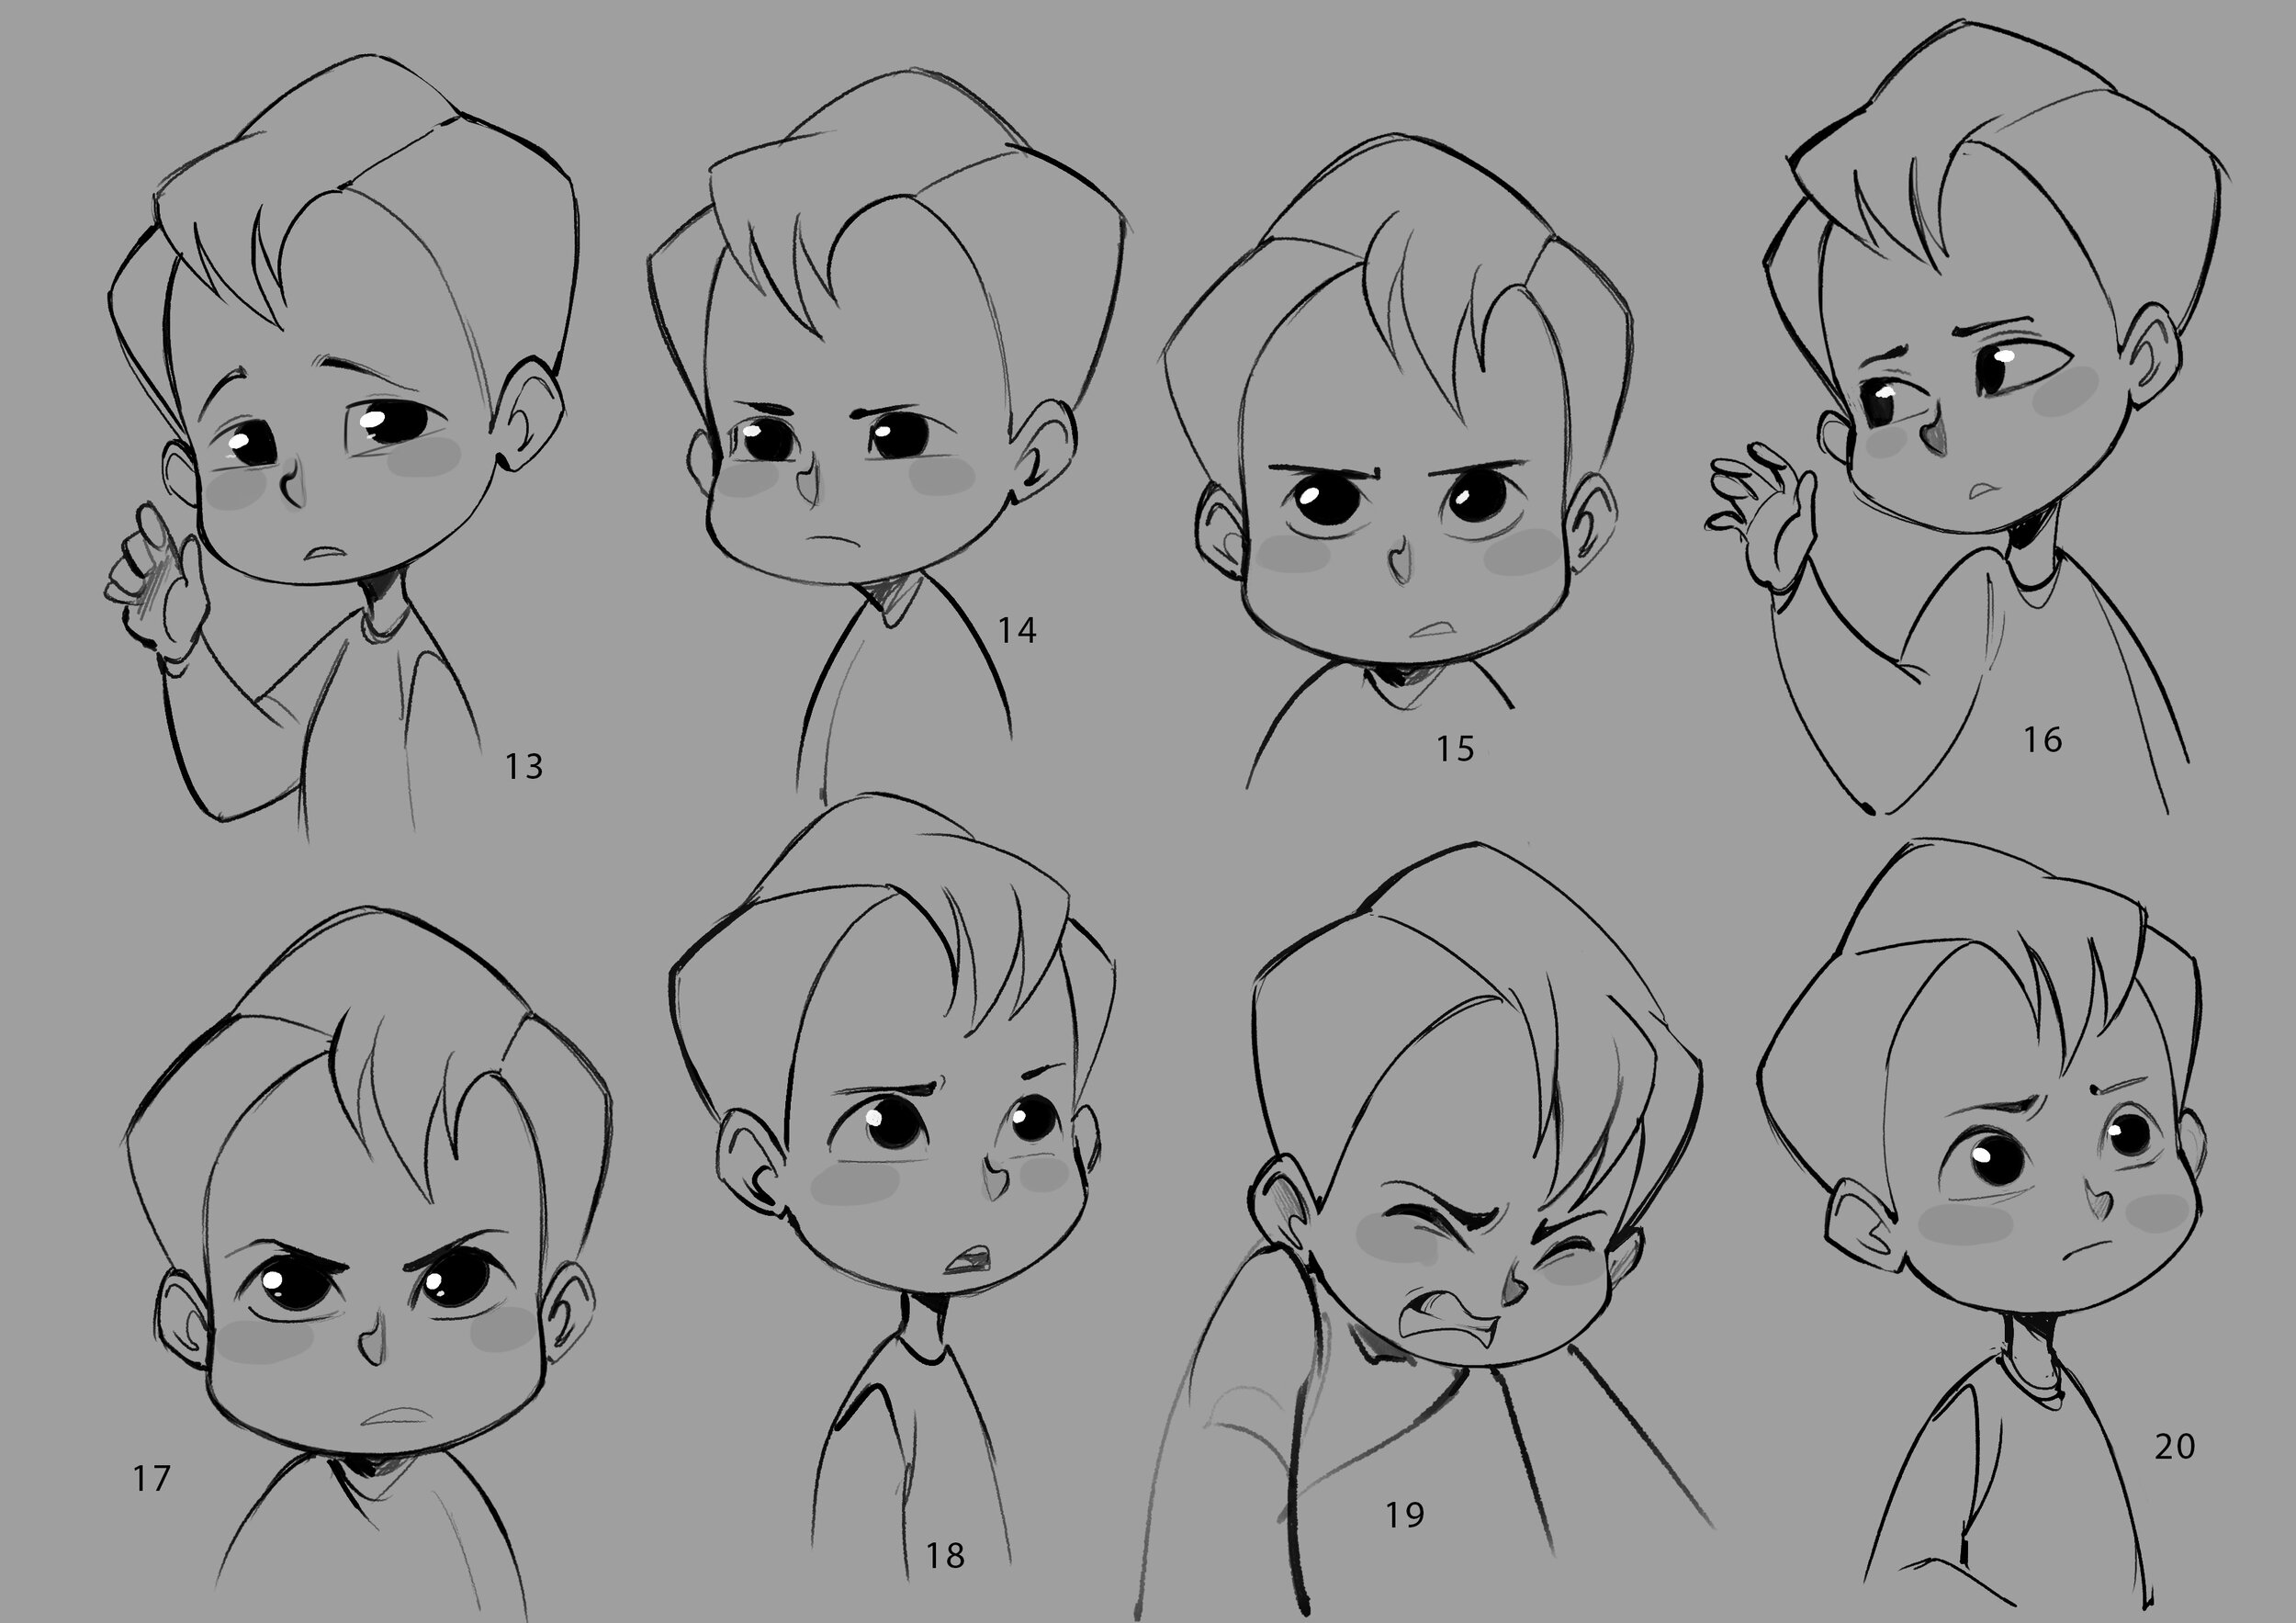 exian expressions03.jpg